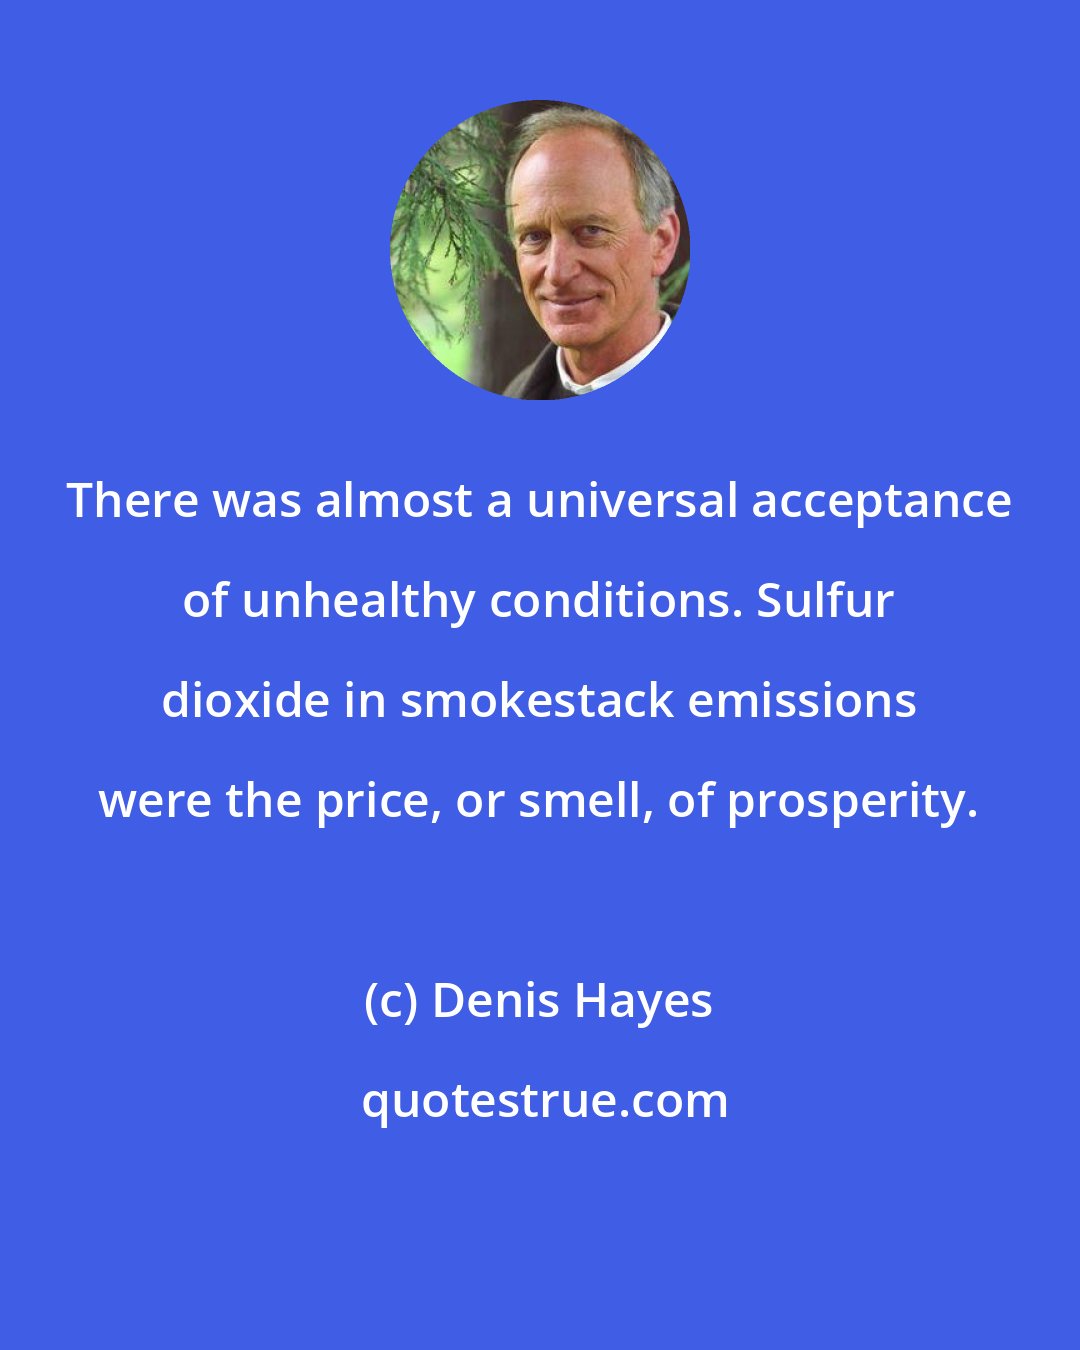 Denis Hayes: There was almost a universal acceptance of unhealthy conditions. Sulfur dioxide in smokestack emissions were the price, or smell, of prosperity.